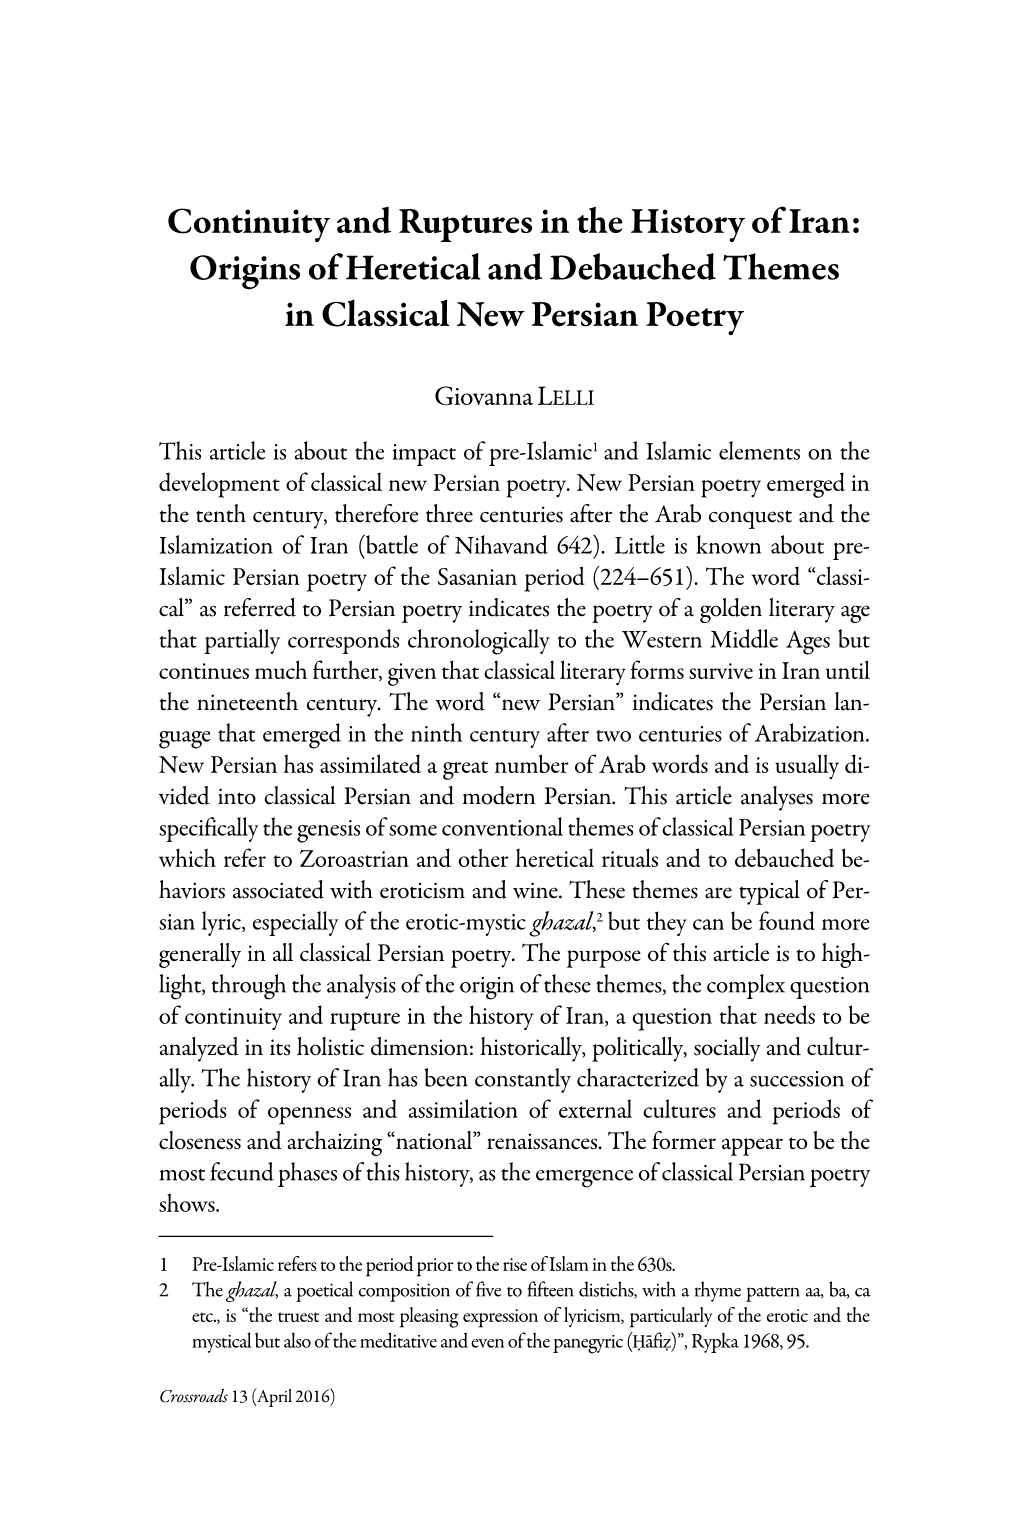 Origins of Heretical and Debauched Themes in Classical New Persian Poetry